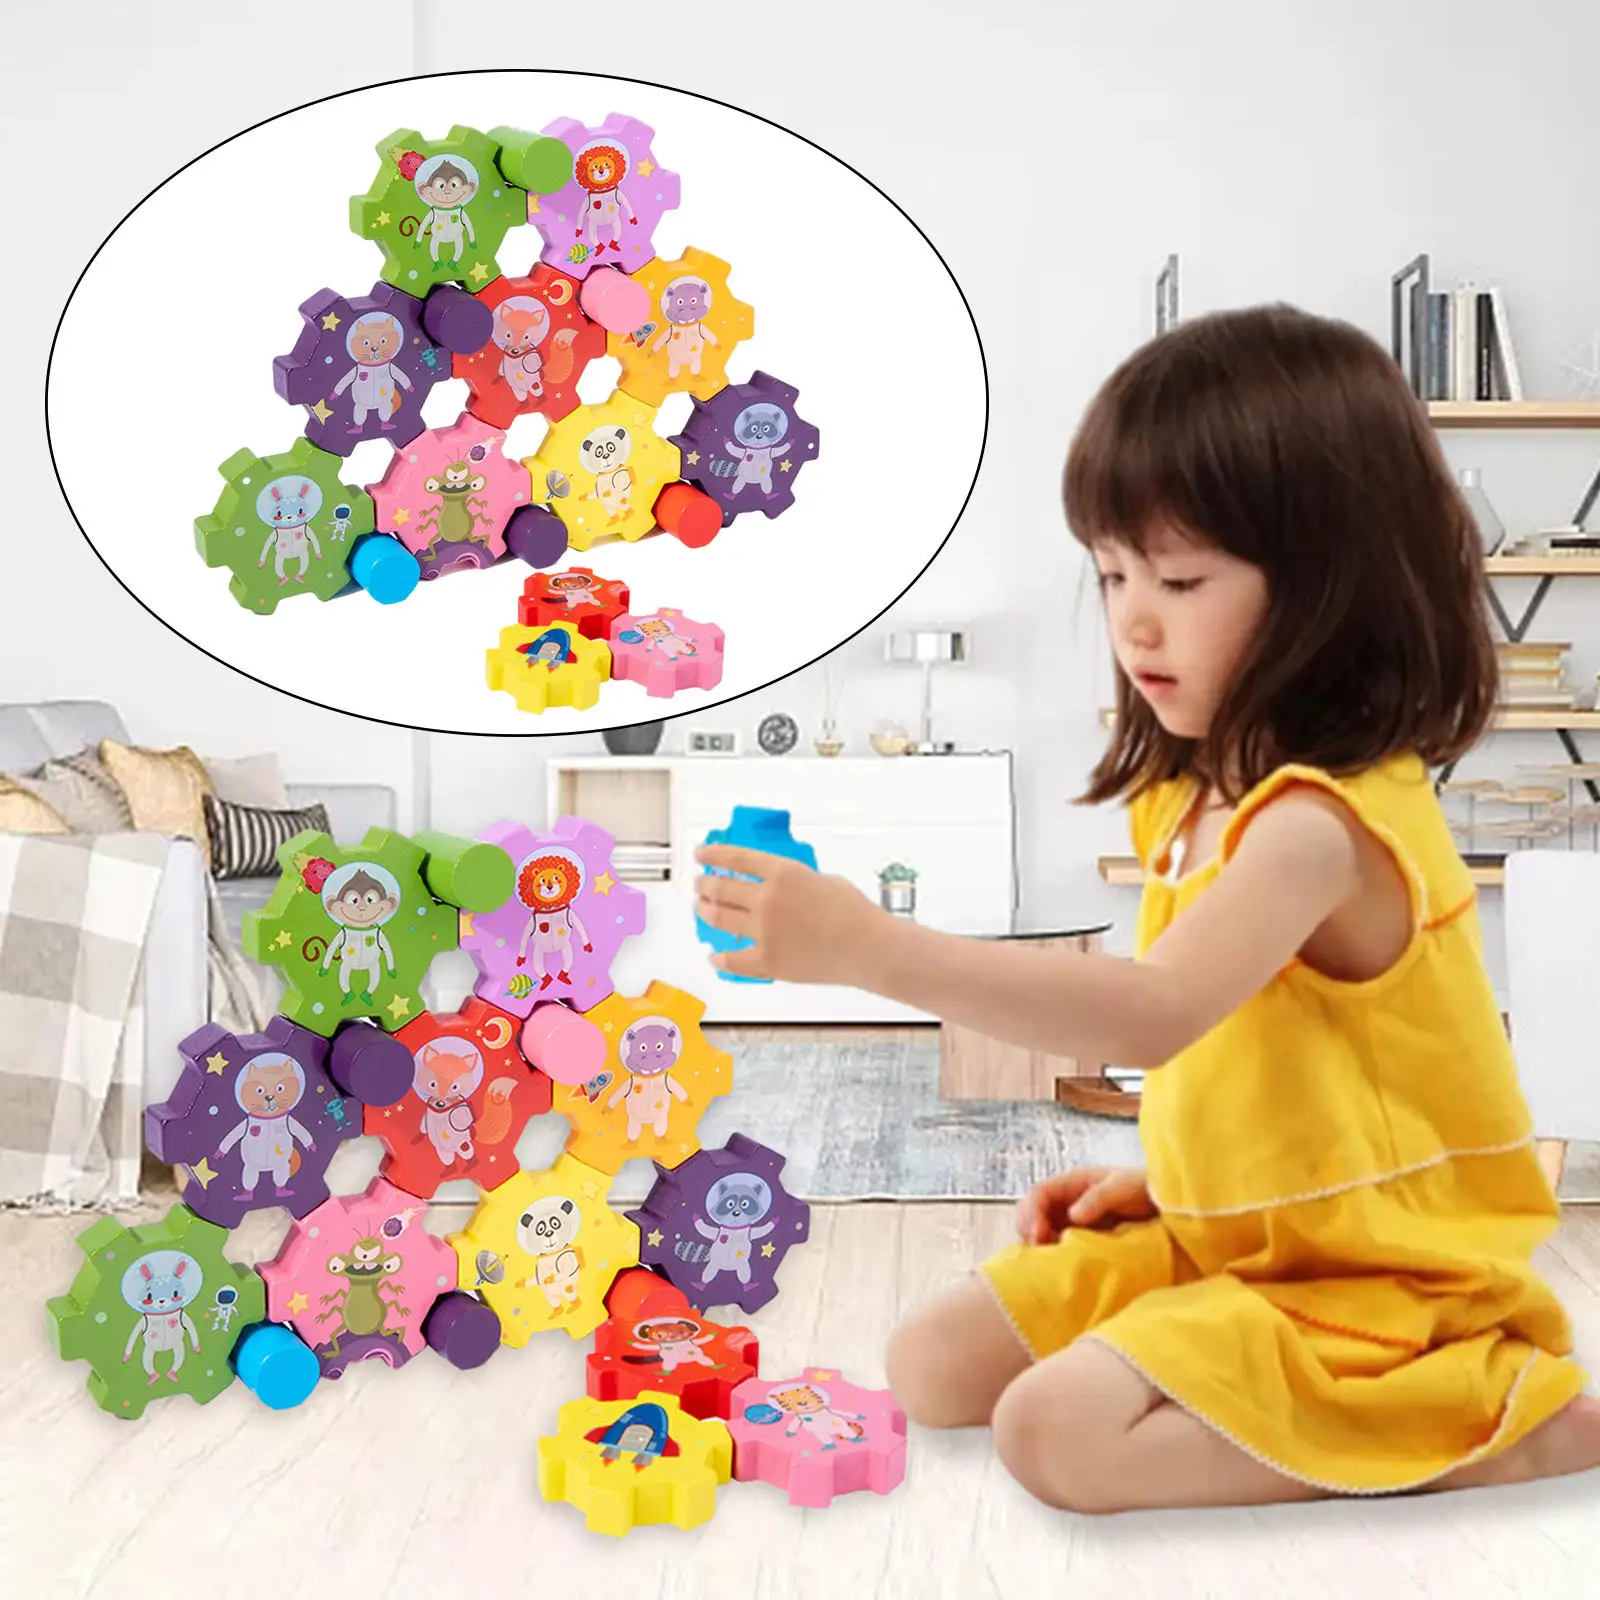 Wooden Gear Stacking Blocks Learning Toys Animal Balance Puzzle Brain Development Stacking Building Blocks Toys for Toddler